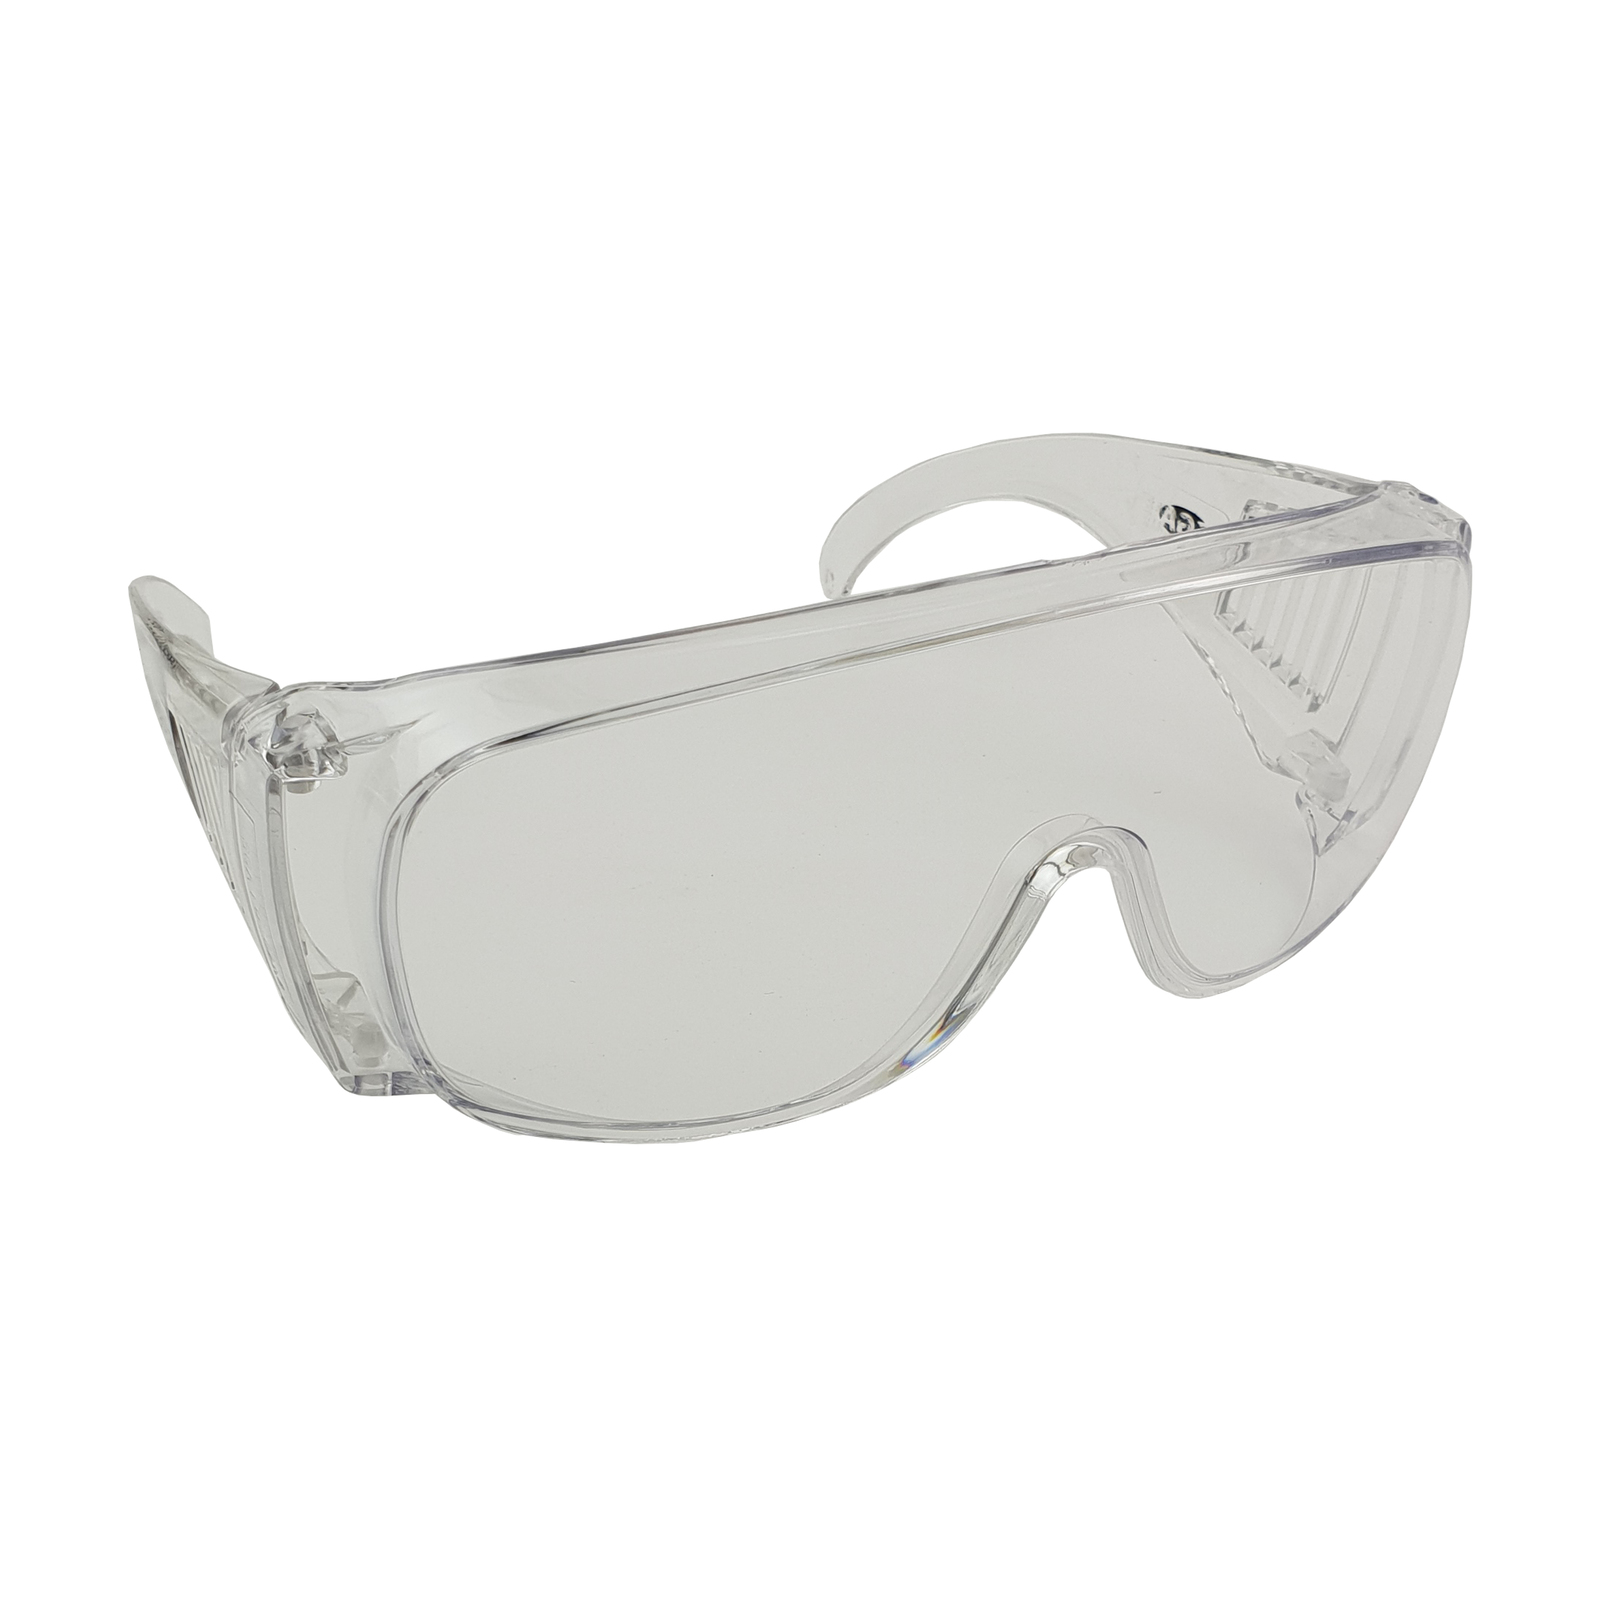 Over Spec Safety Glasses Alpha - 1 Each - Clear Lens